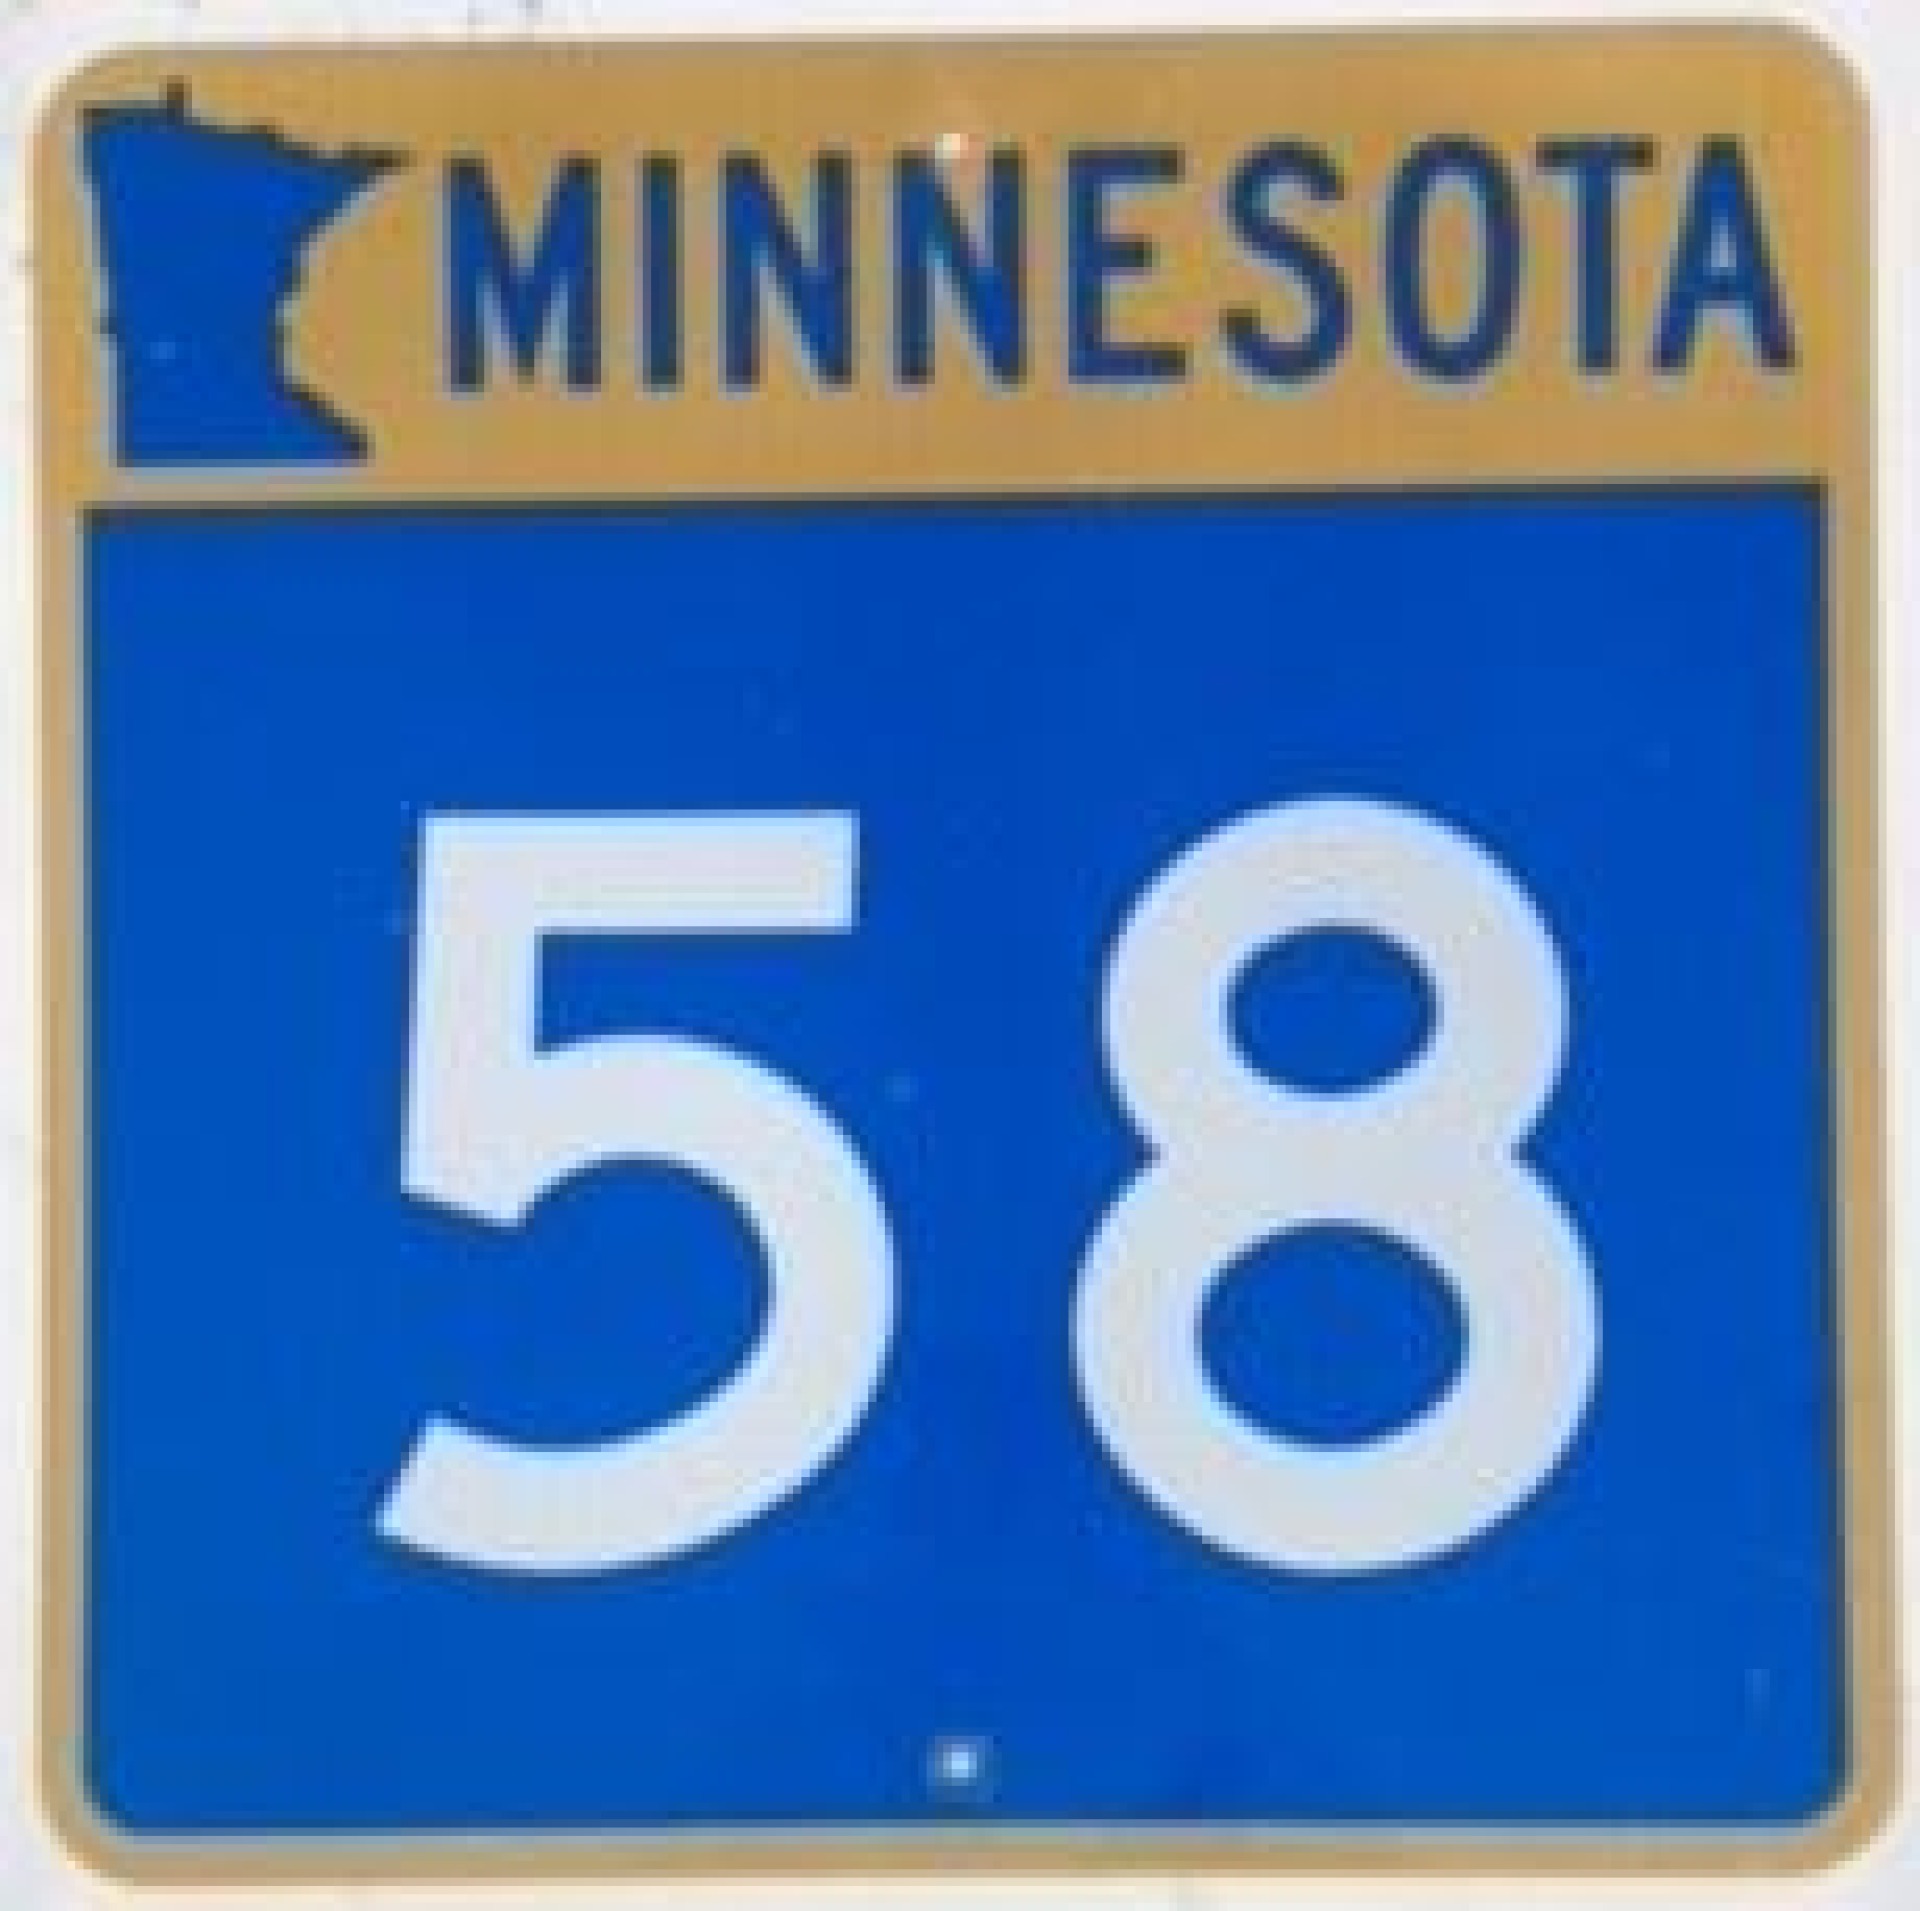 State highway sign example.